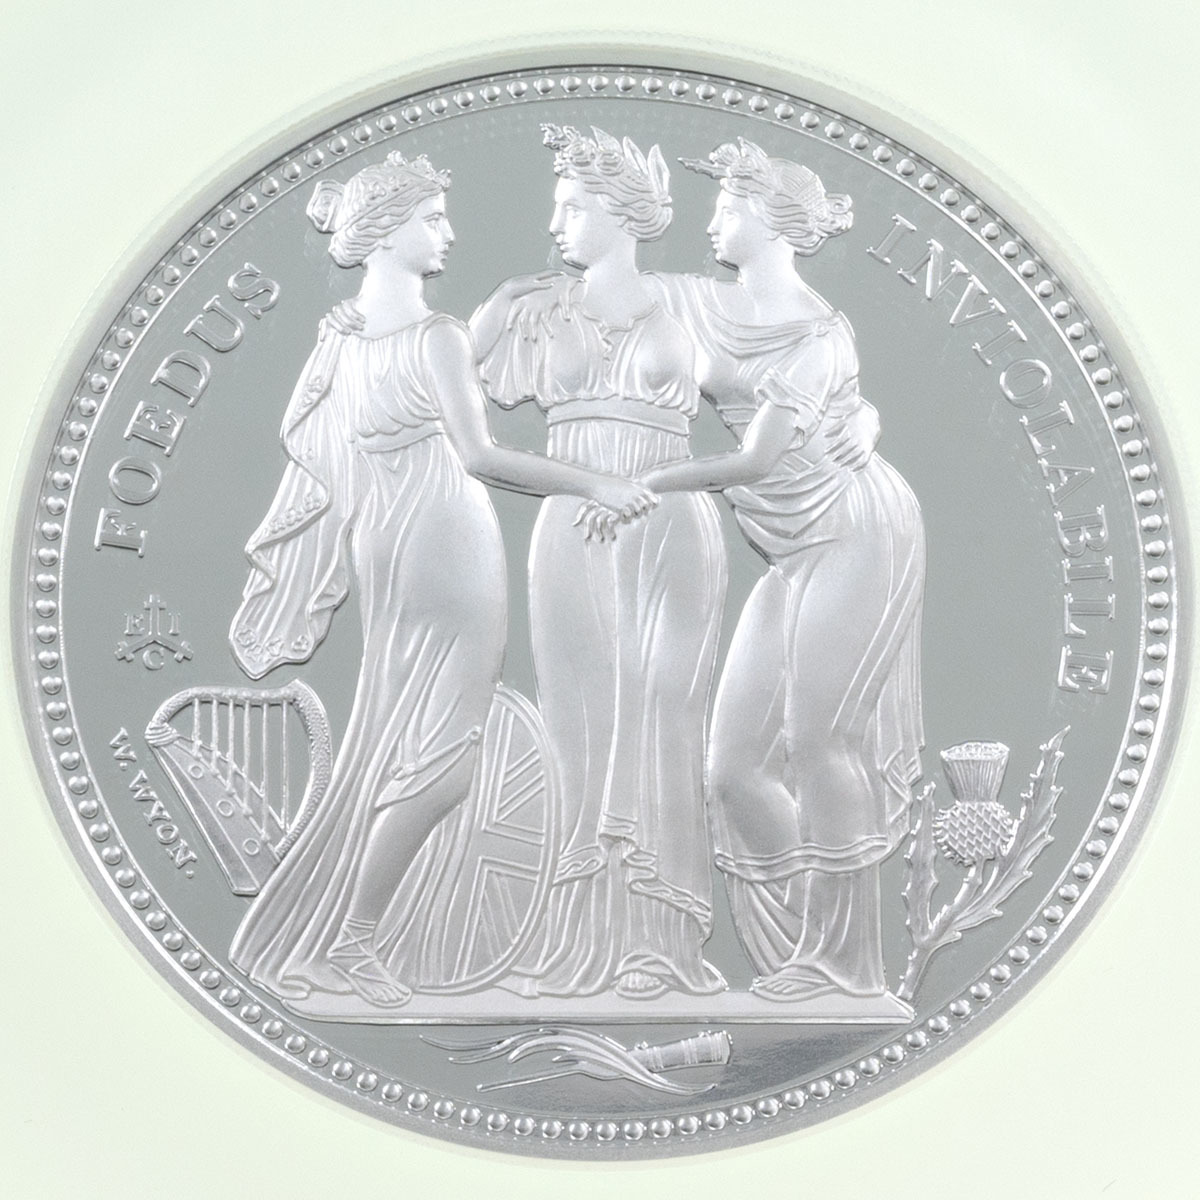 2021 Saint Helena Three Graces Five Ounce Silver Proof Coin NGC Graded PF 69 Ultra Cameo First Releases Reverse